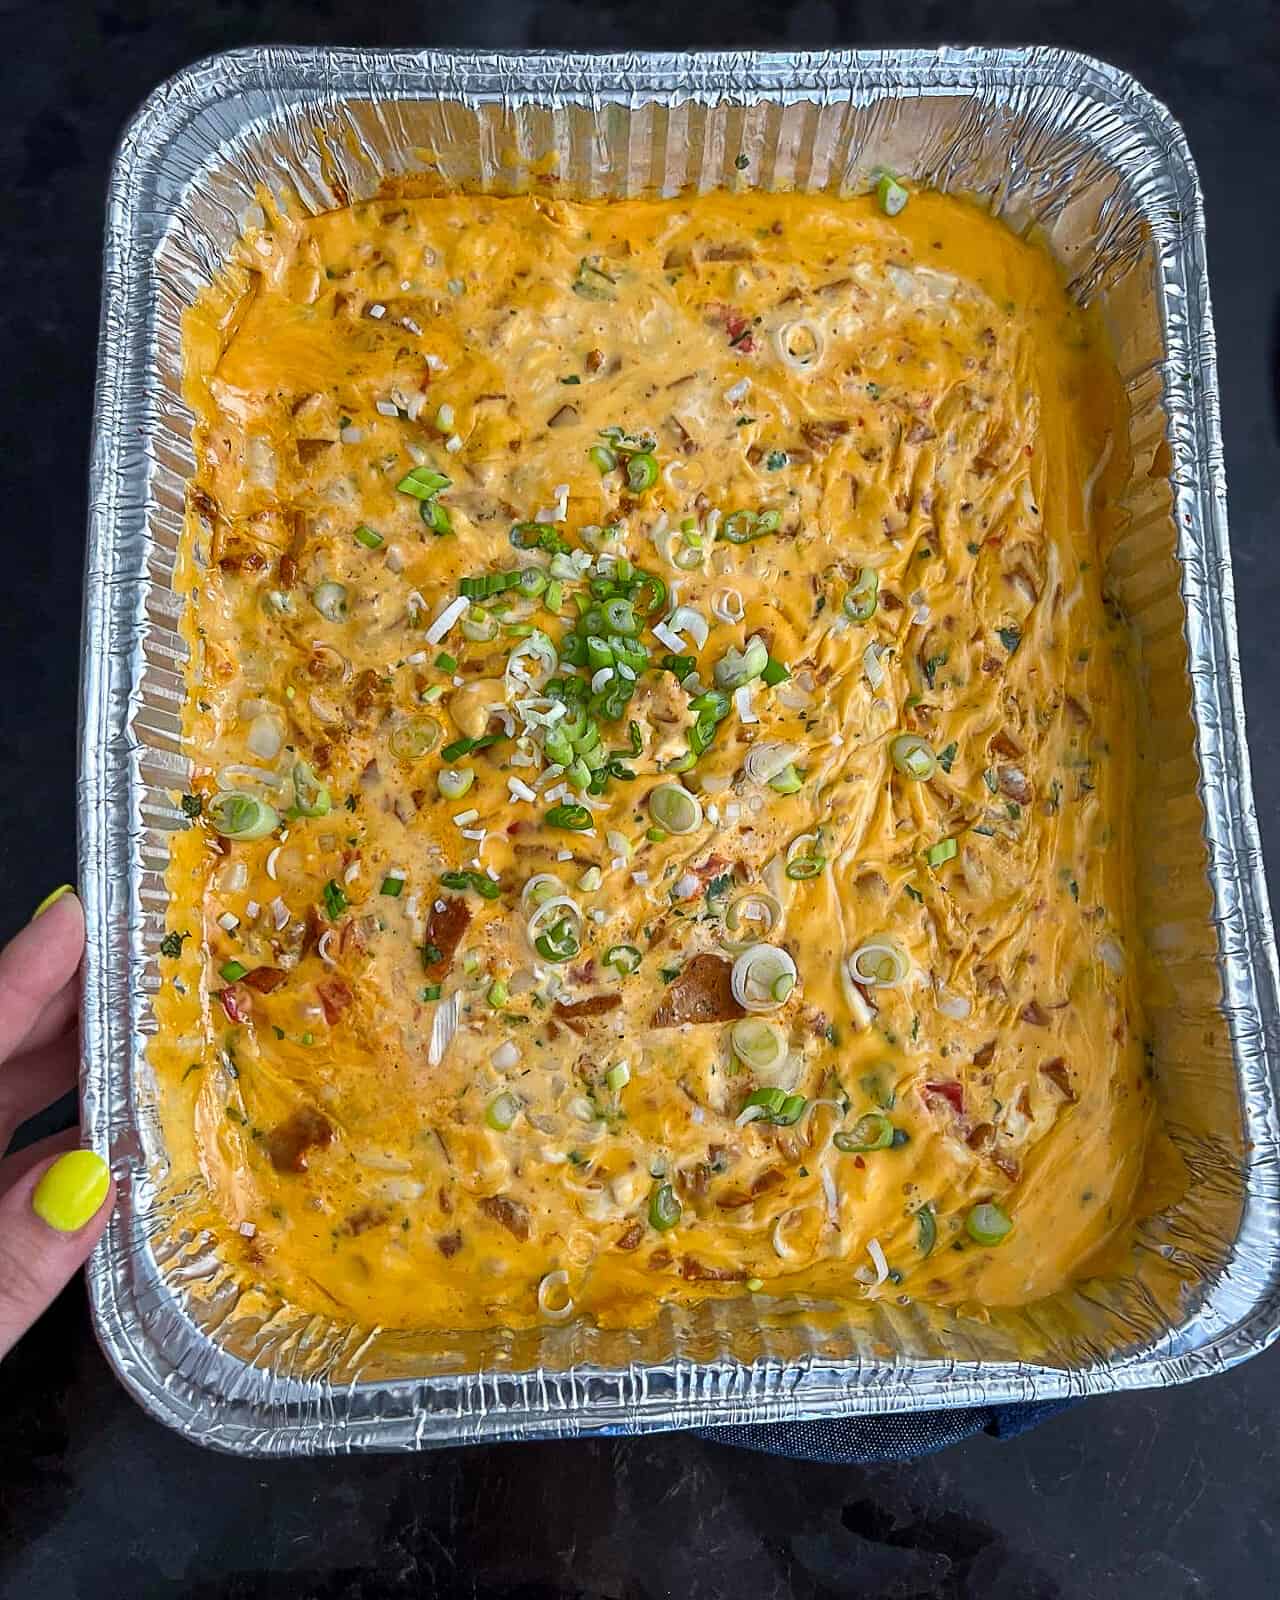 Traeger Smoked queso game day app with Chorizo